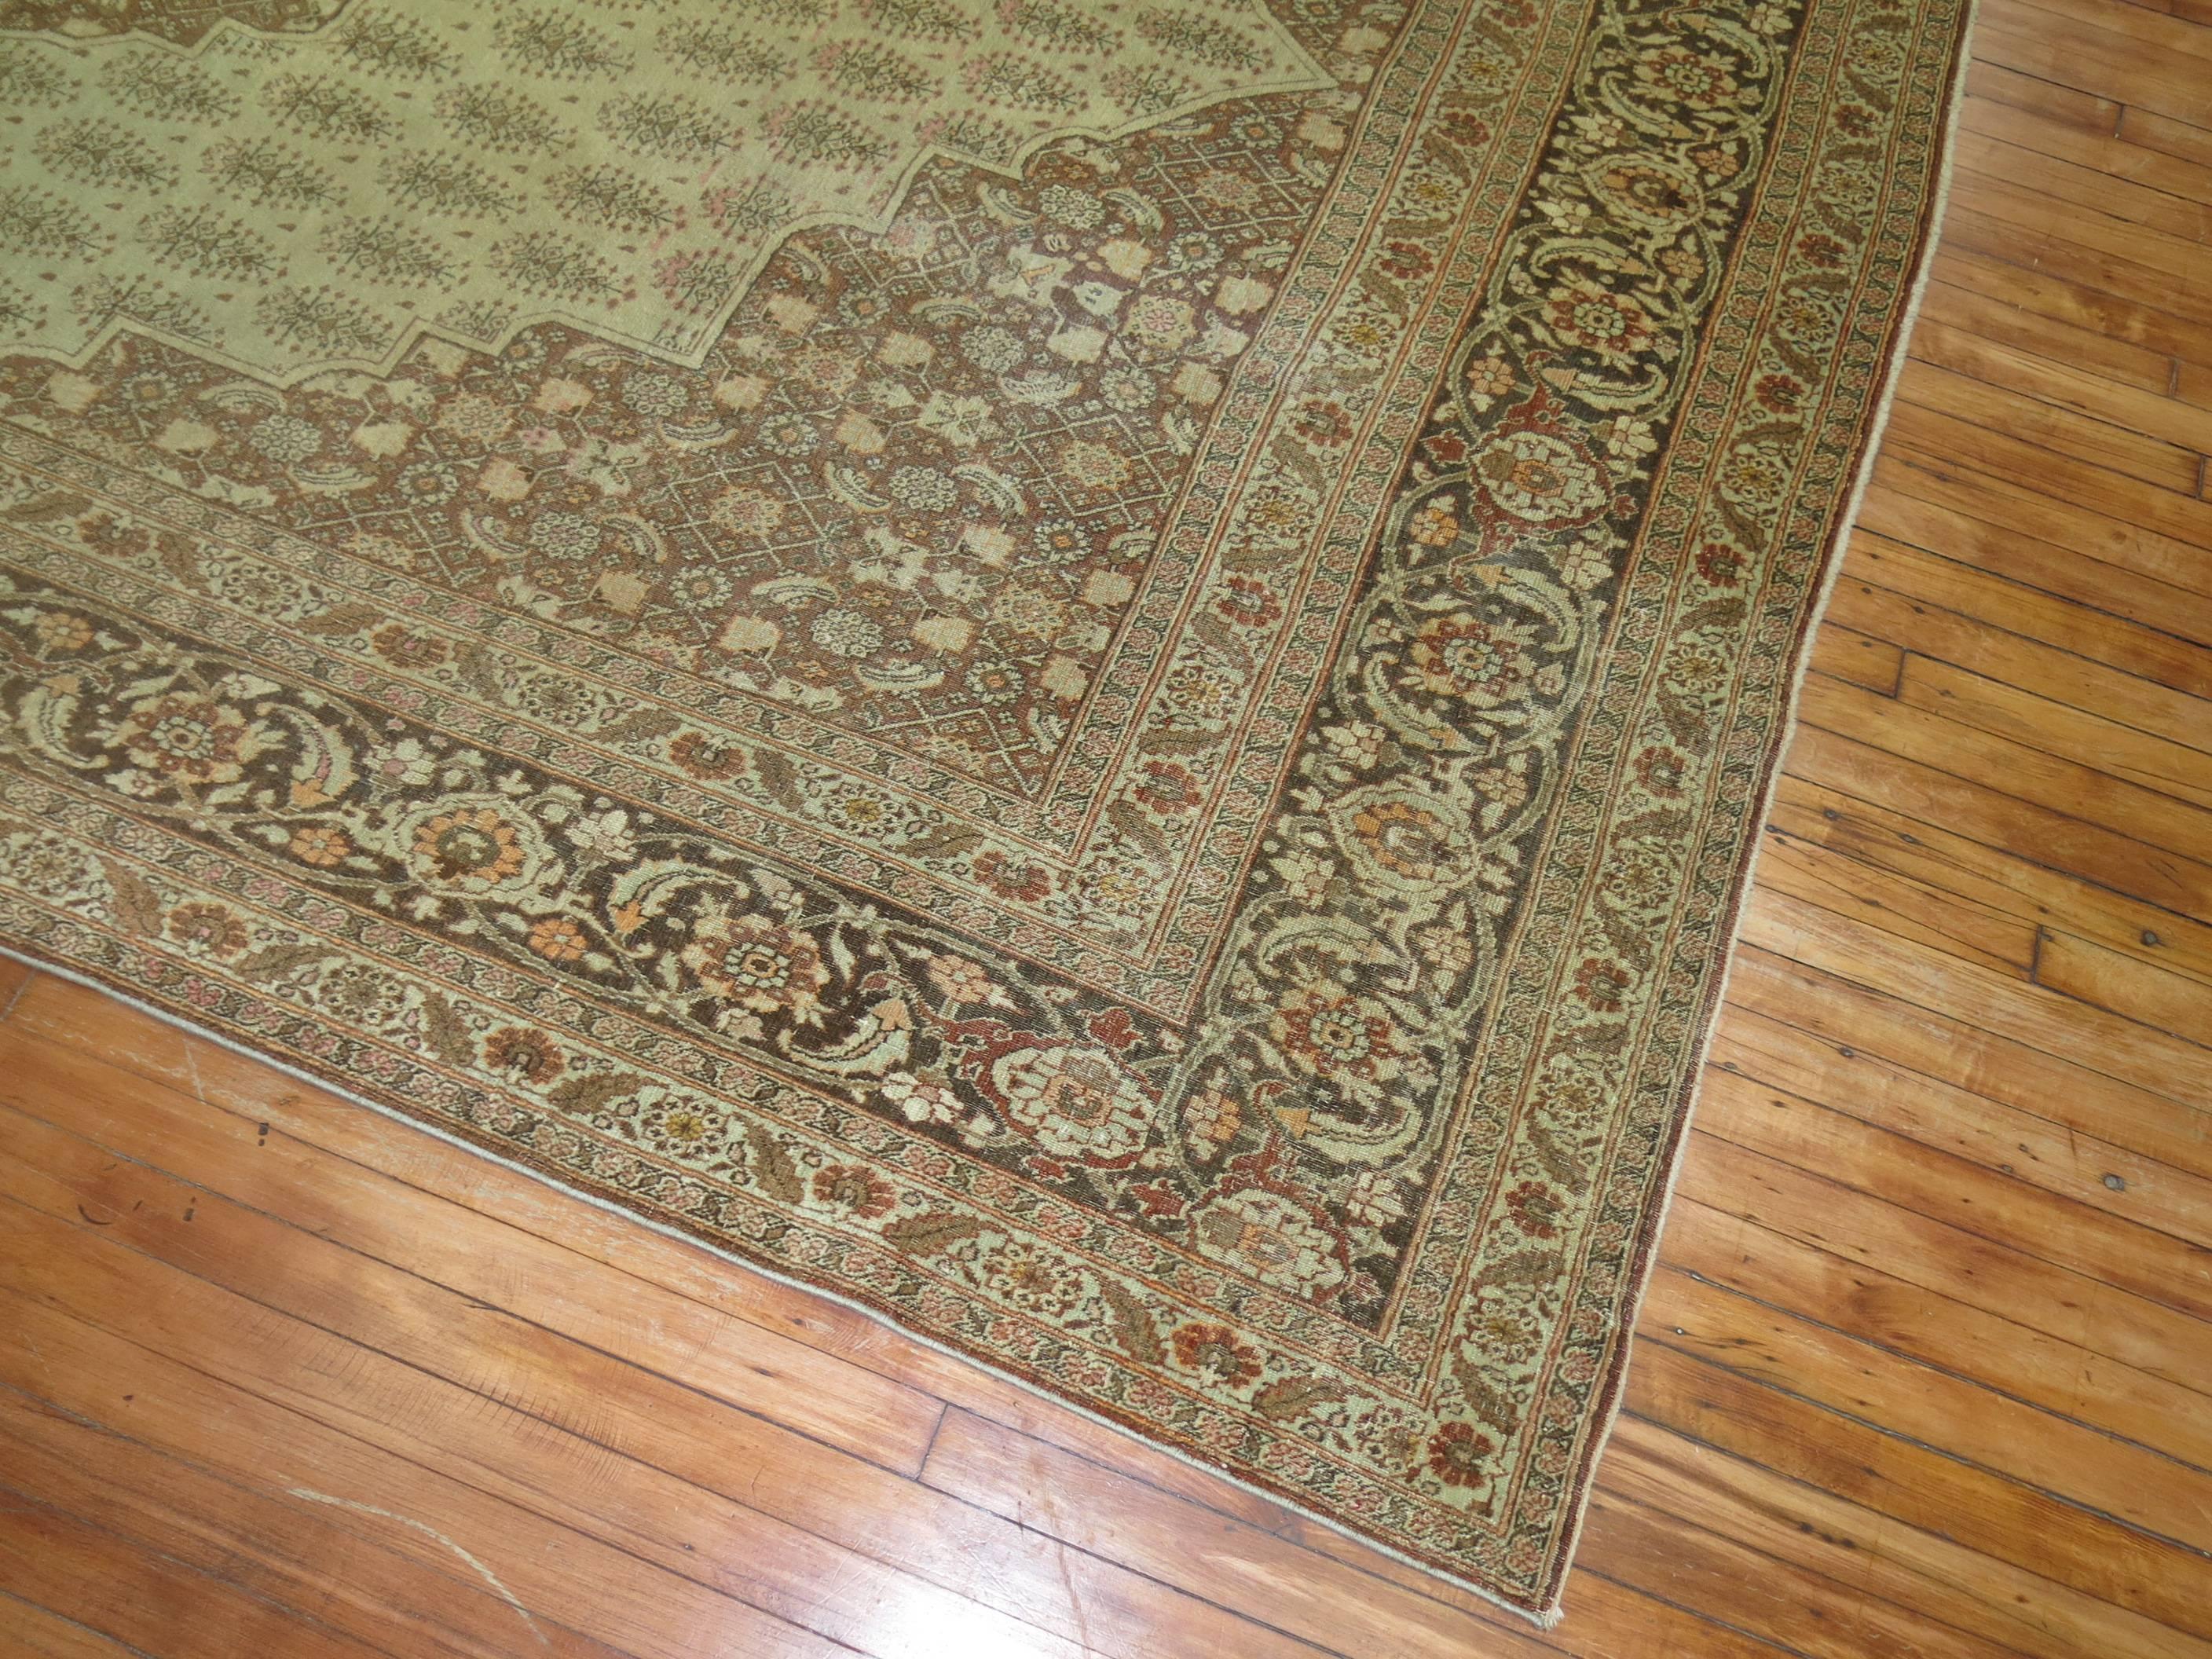 Early 20th Century Antique Persian Tabriz Rug Herati Pattern in Brown and Cinnamon Tones For Sale